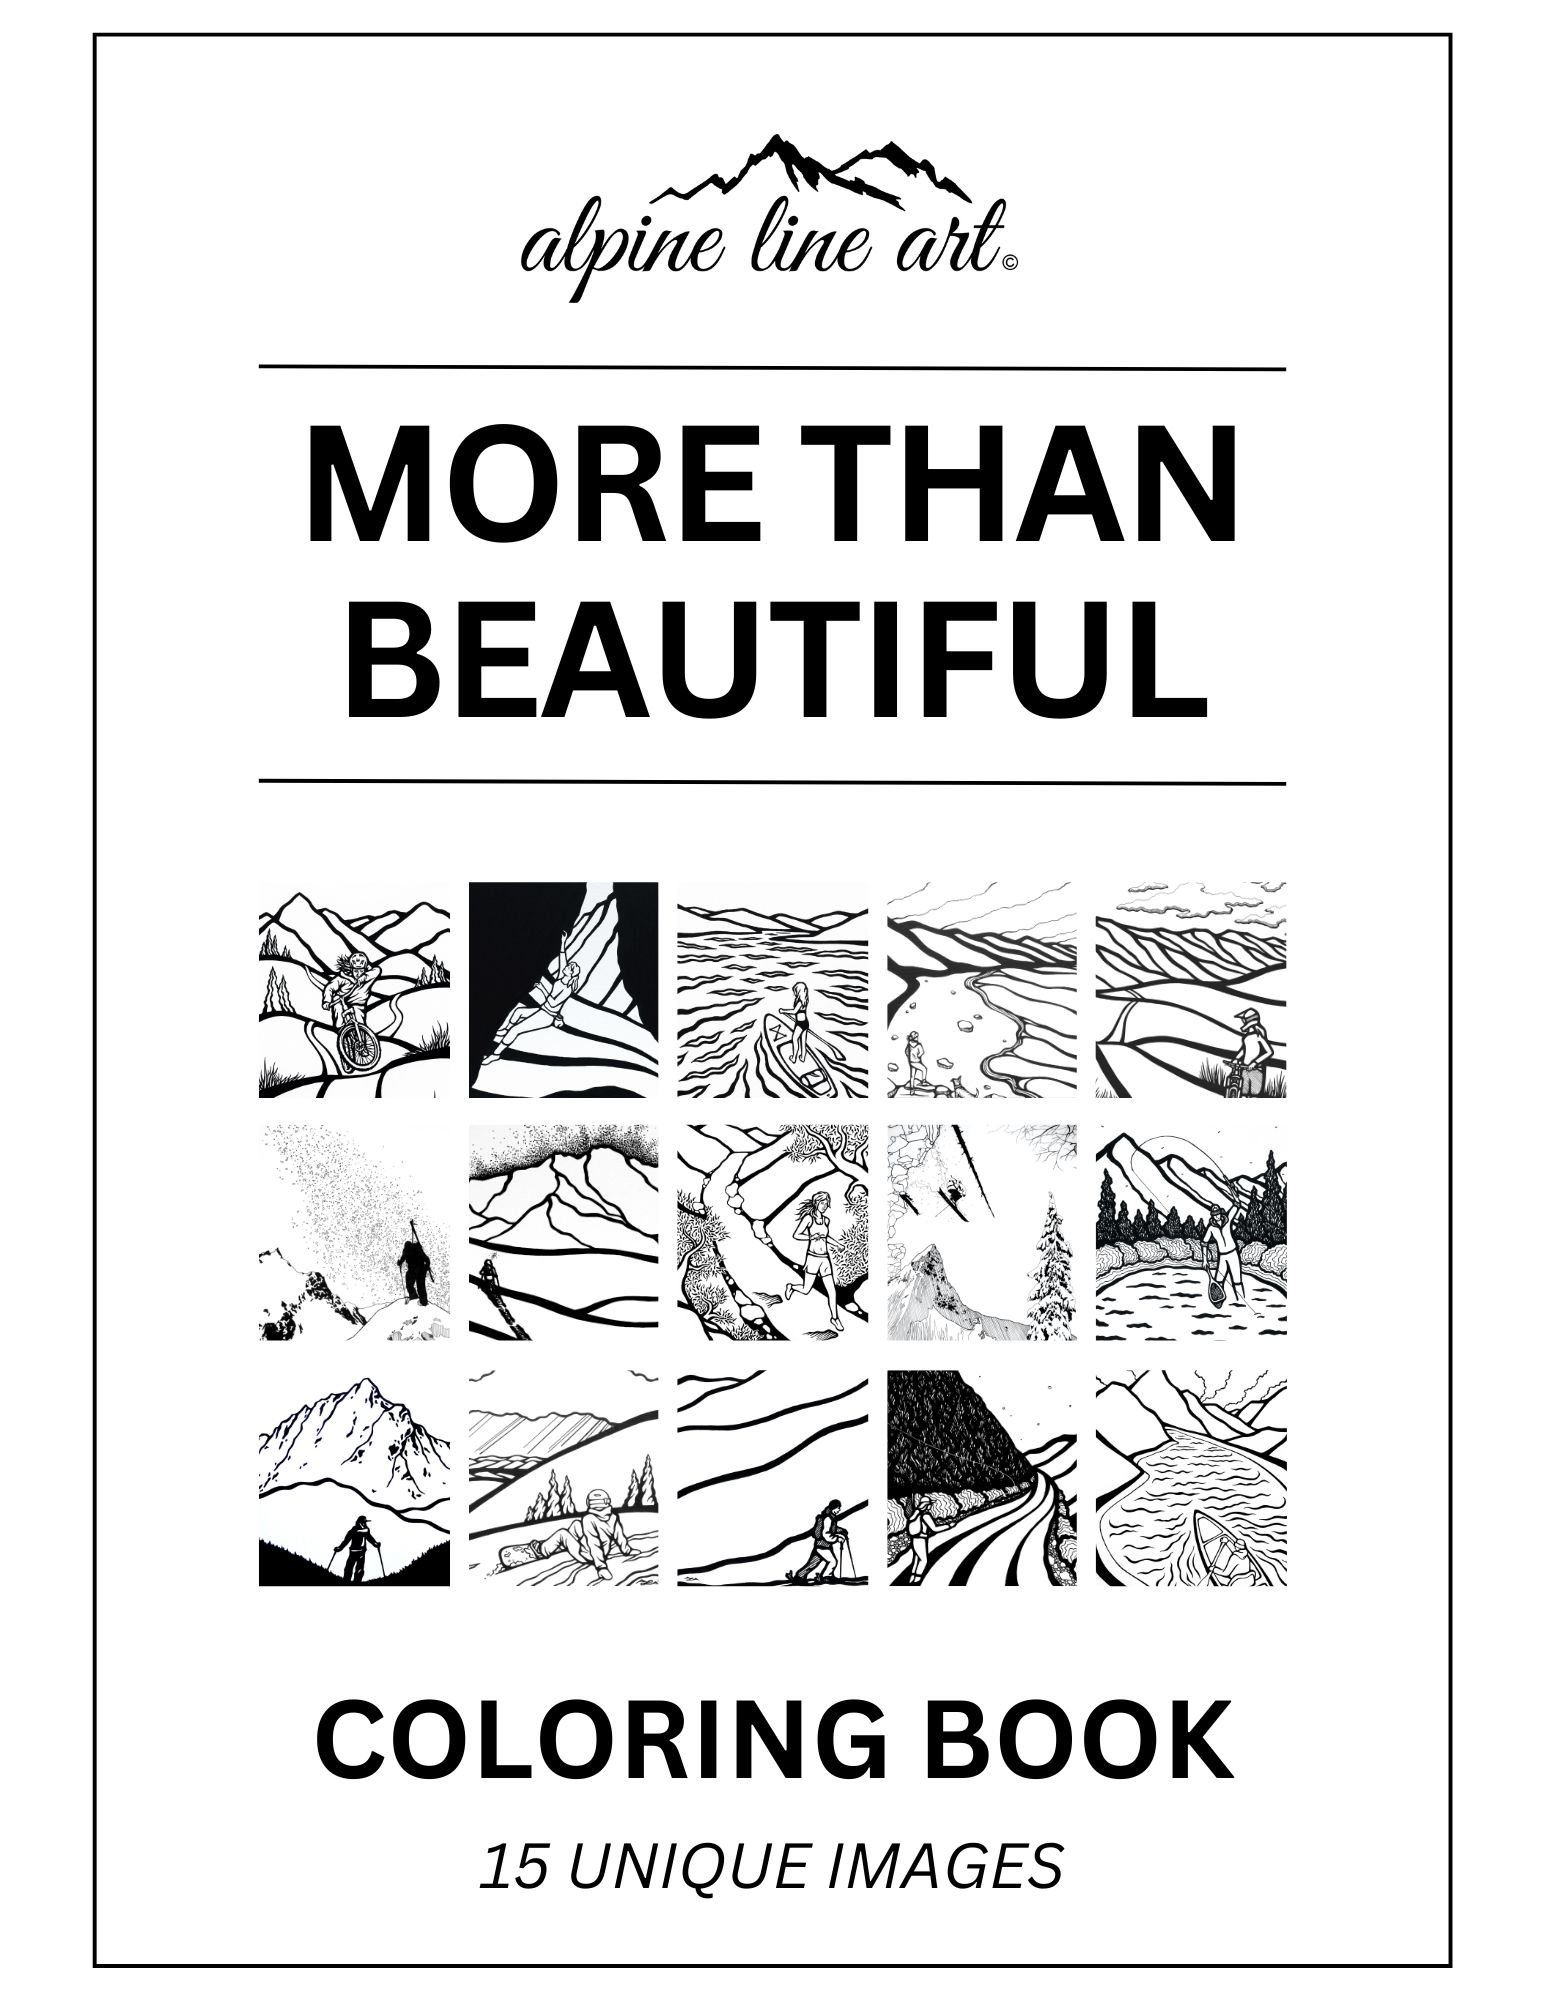 ALA Coloring Pages - More Than Beautiful.jpg